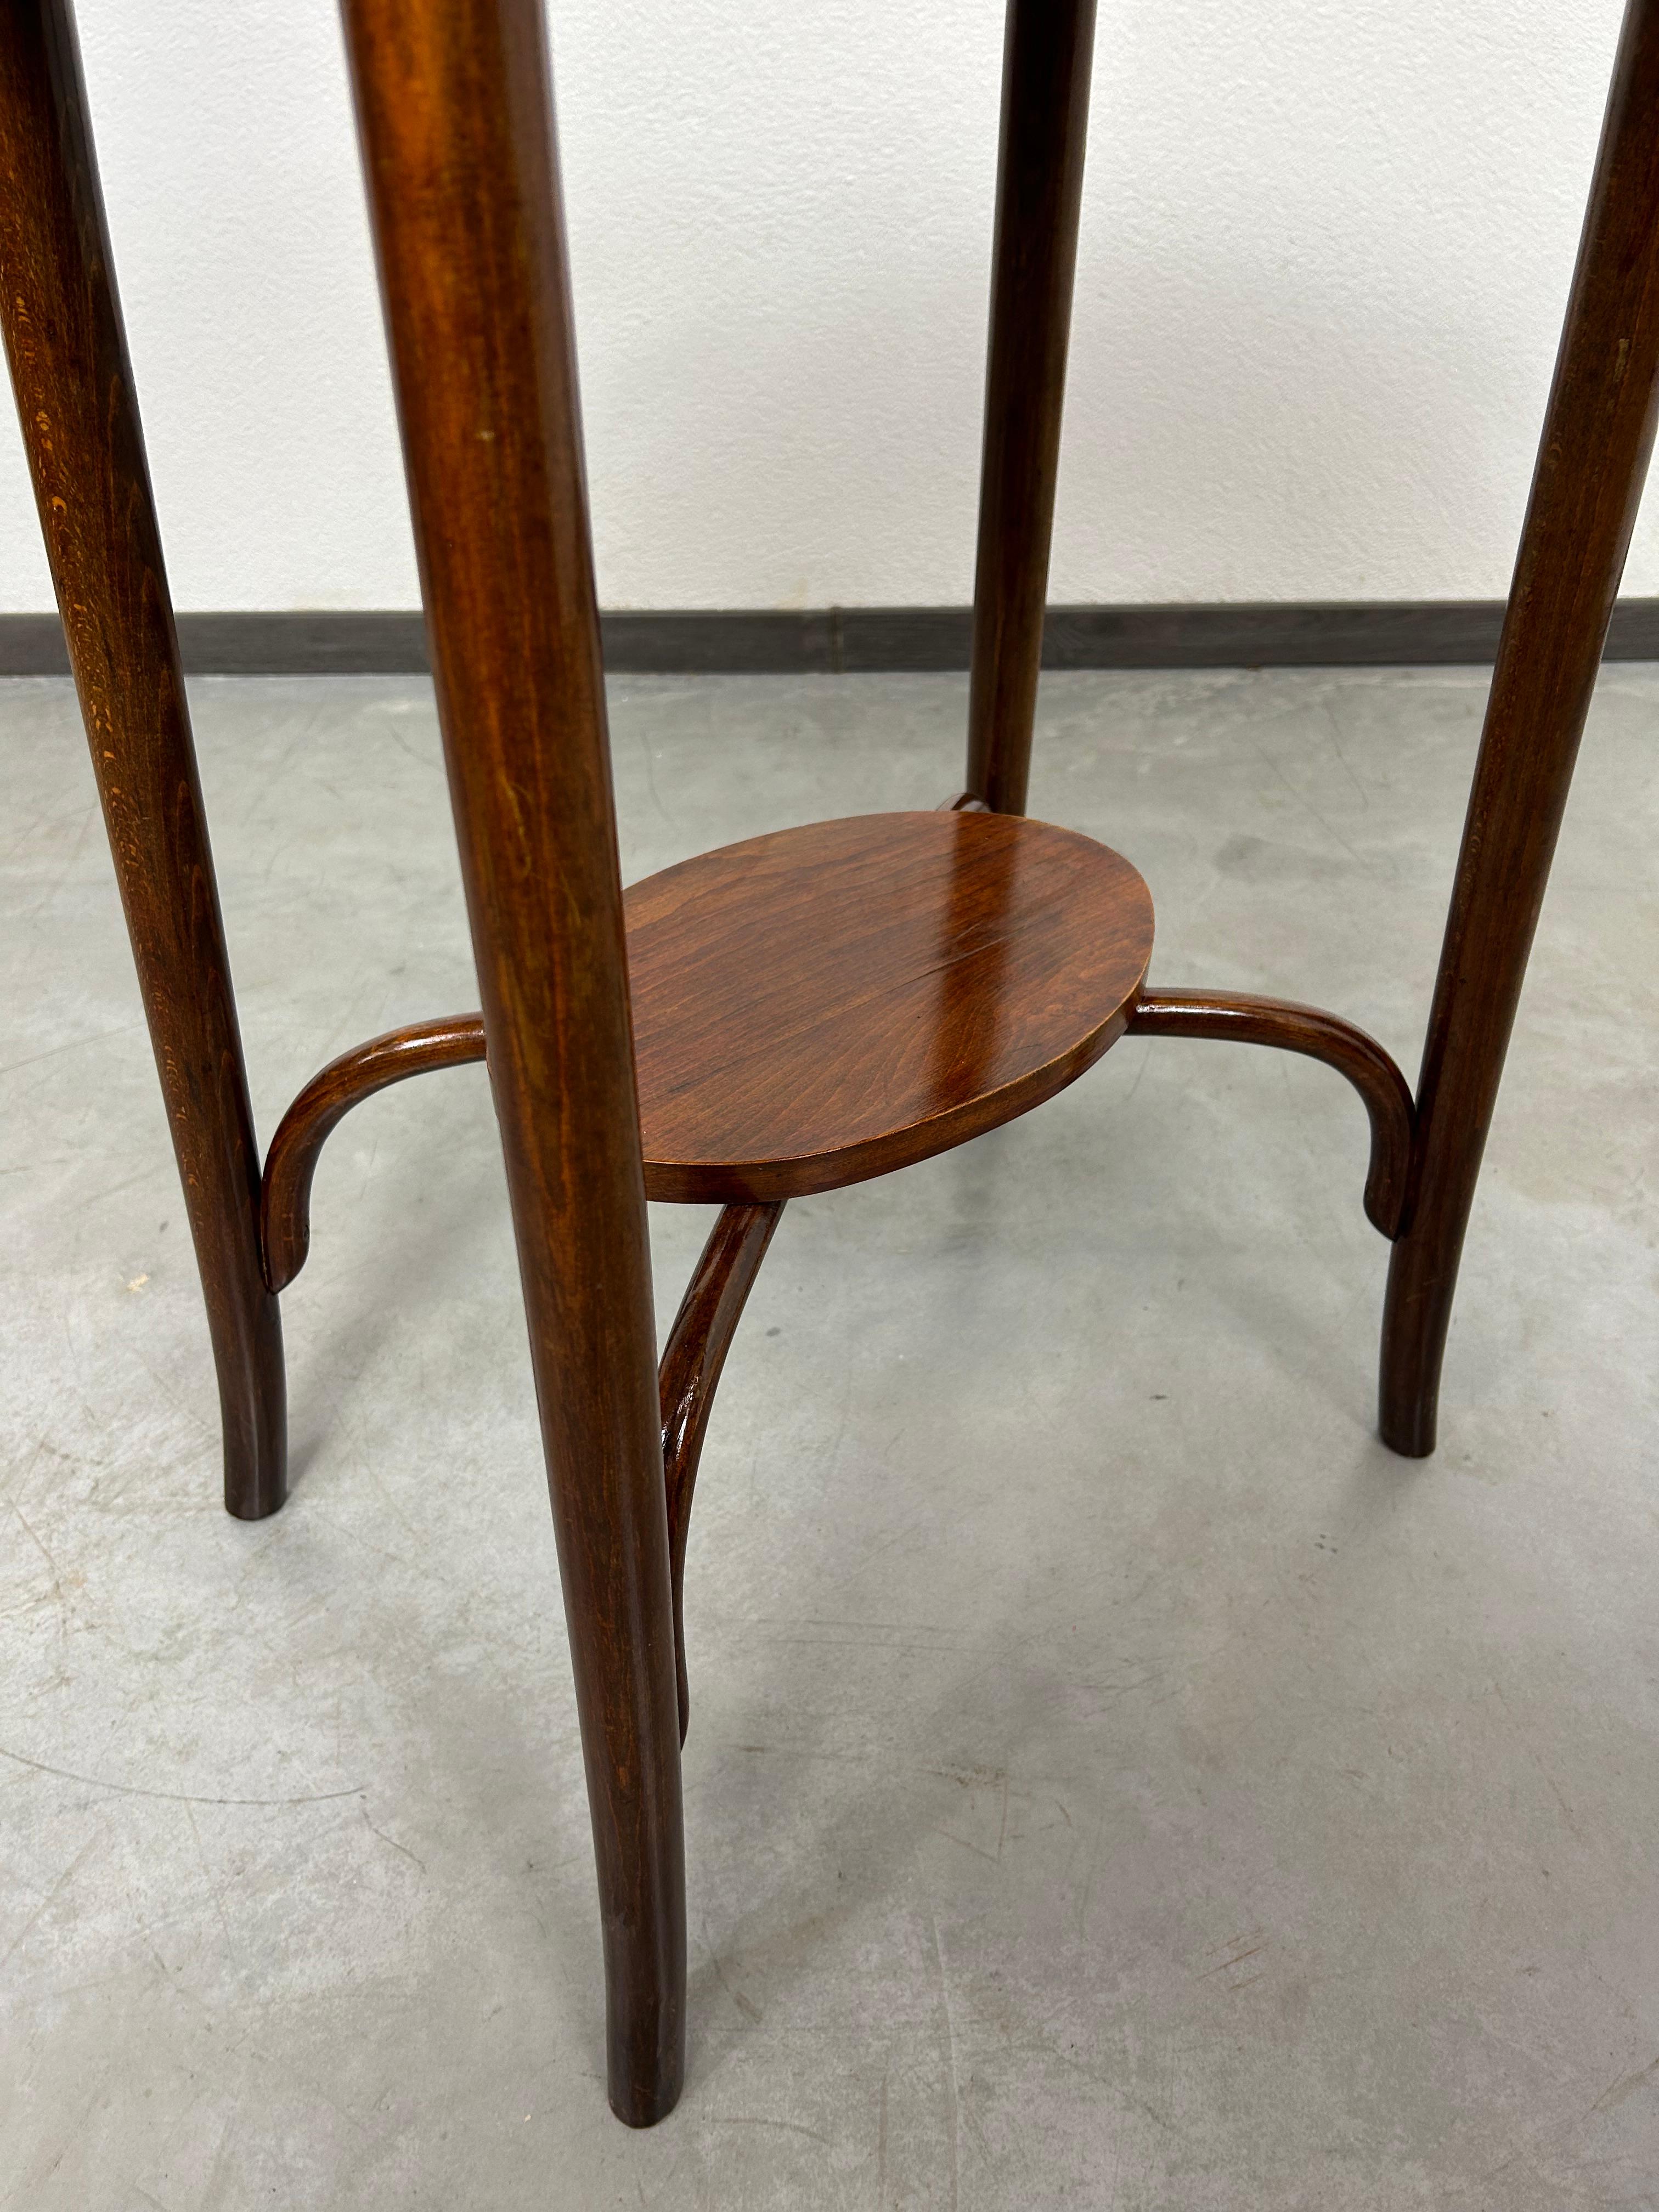 Oval bentwood table by Thonet In Good Condition For Sale In Banská Štiavnica, SK